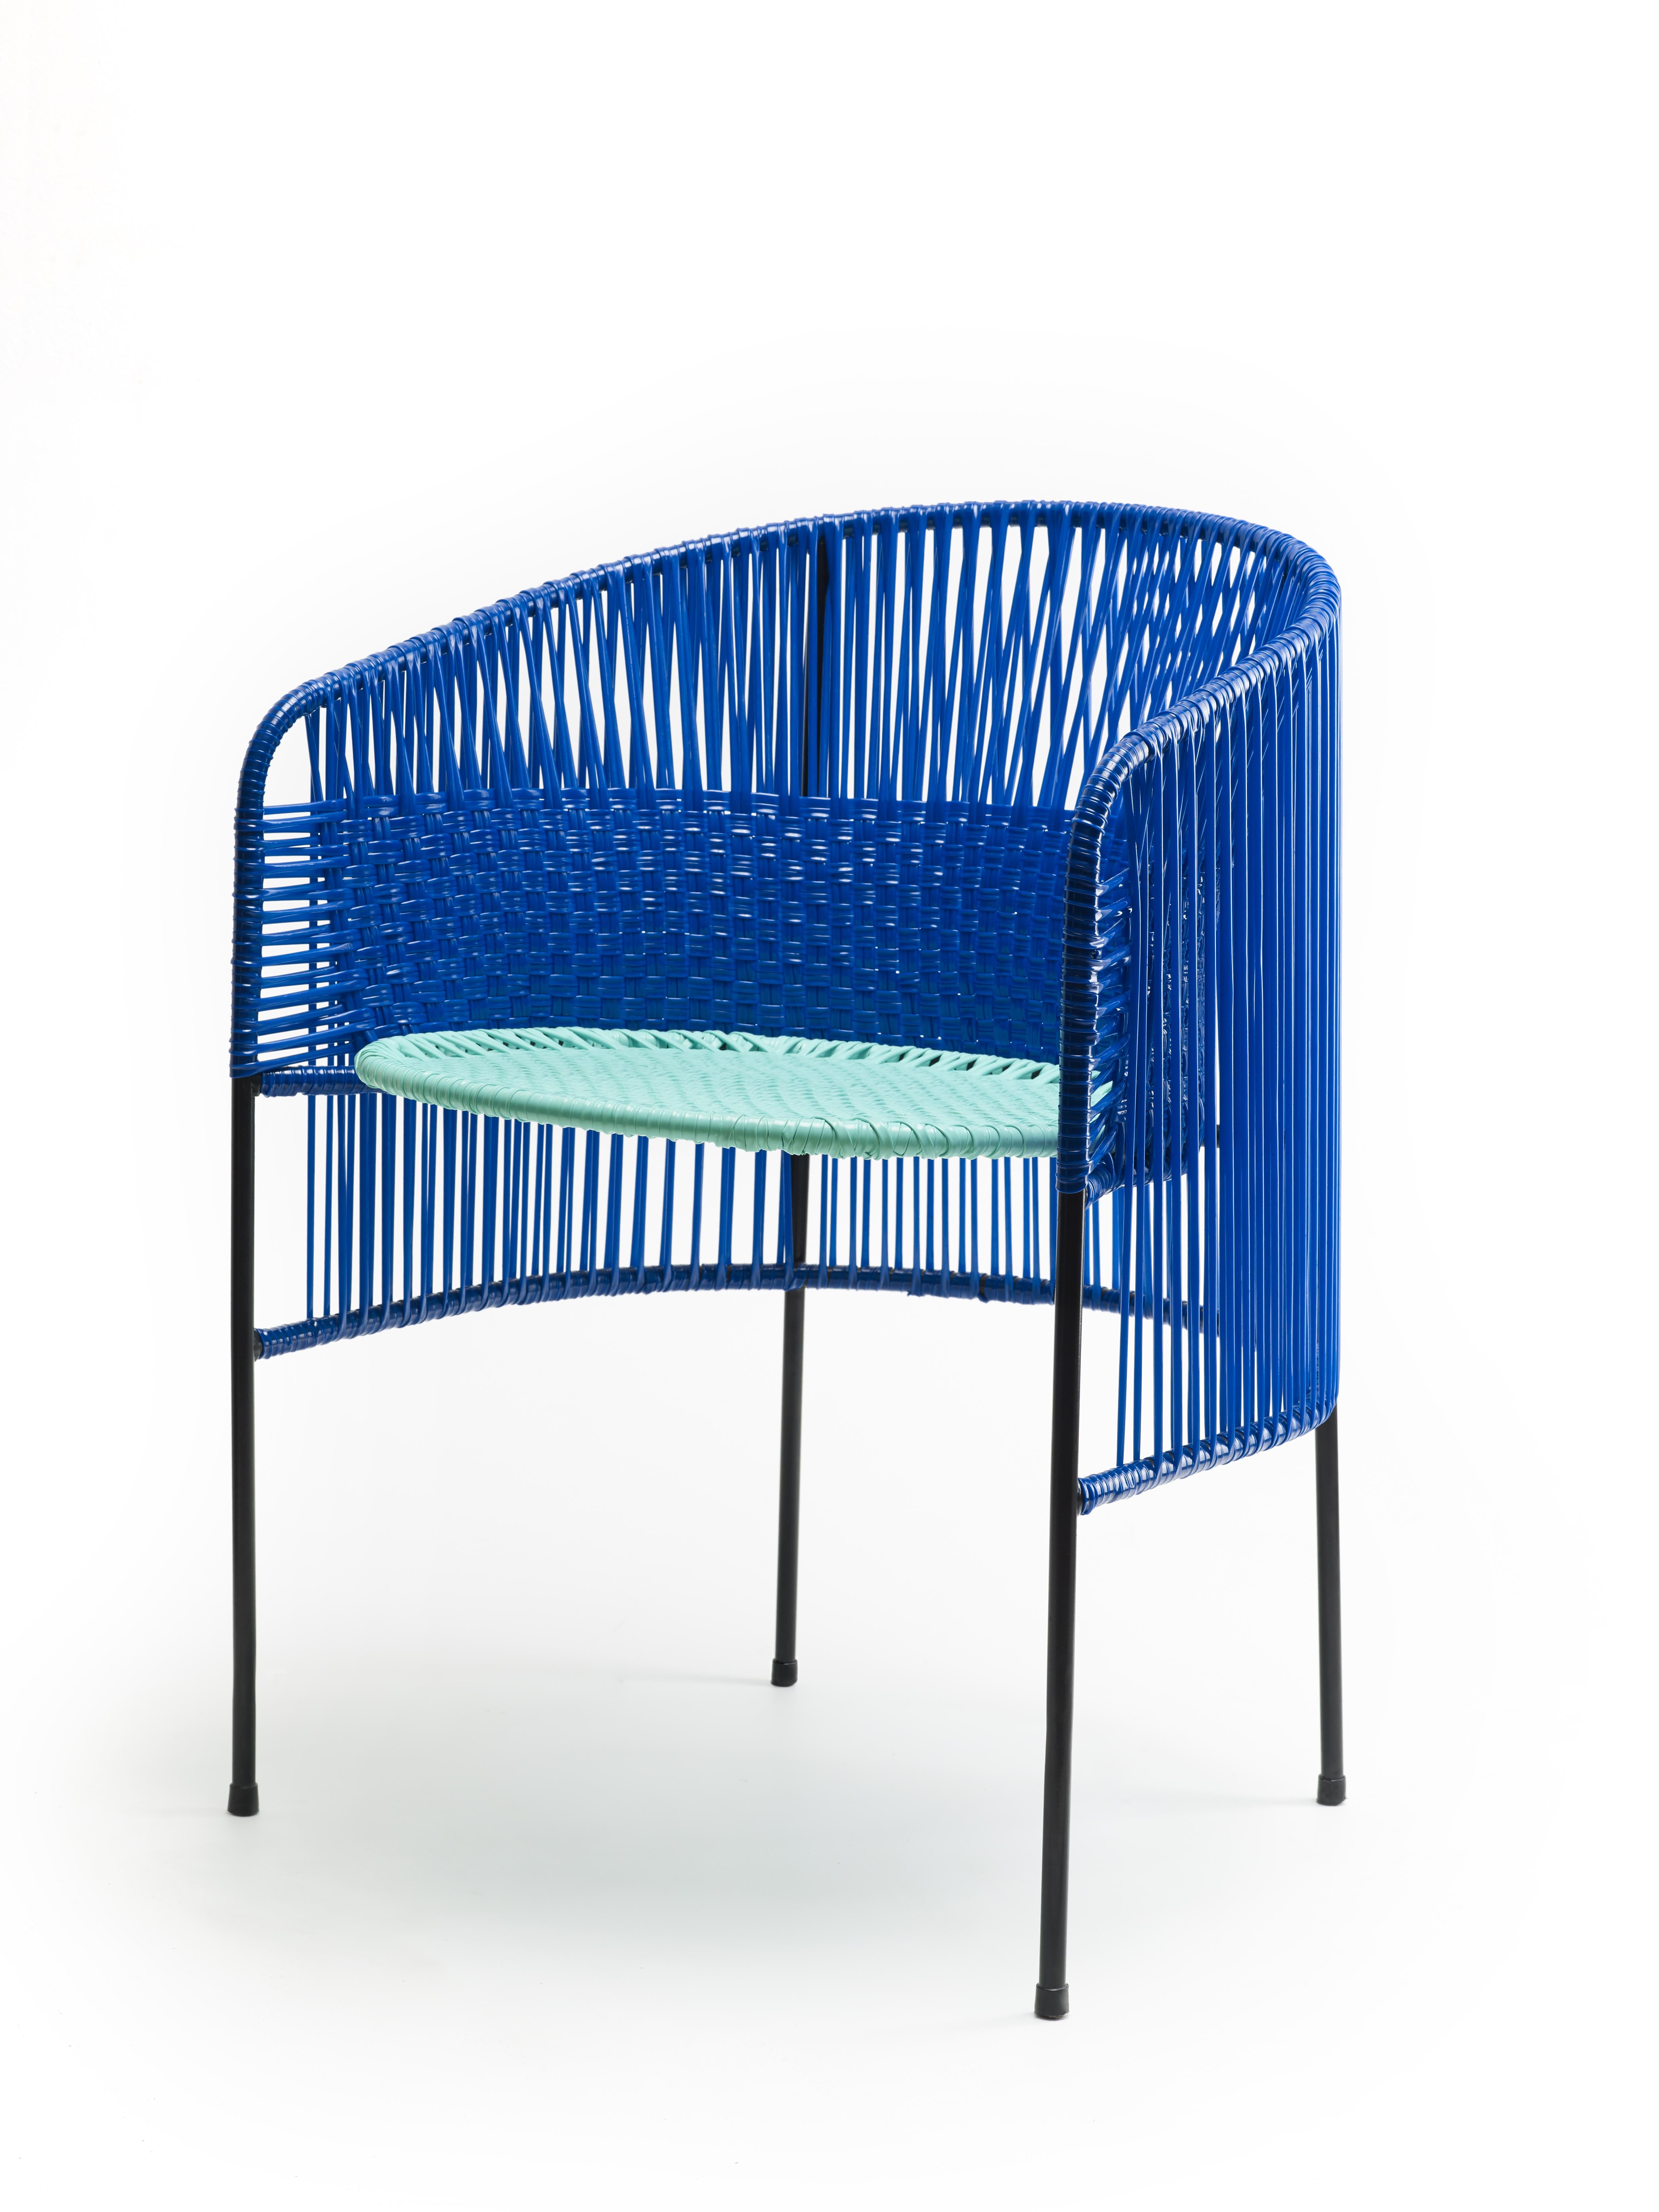 Set of 4 Blue Caribe lounge chair by Sebastian Herkner
Materials: Galvanized and powder-coated tubular steel. PVC strings are made from recycled plastic.
Technique: Made from recycled plastic and weaved by local craftspeople in Colombia.